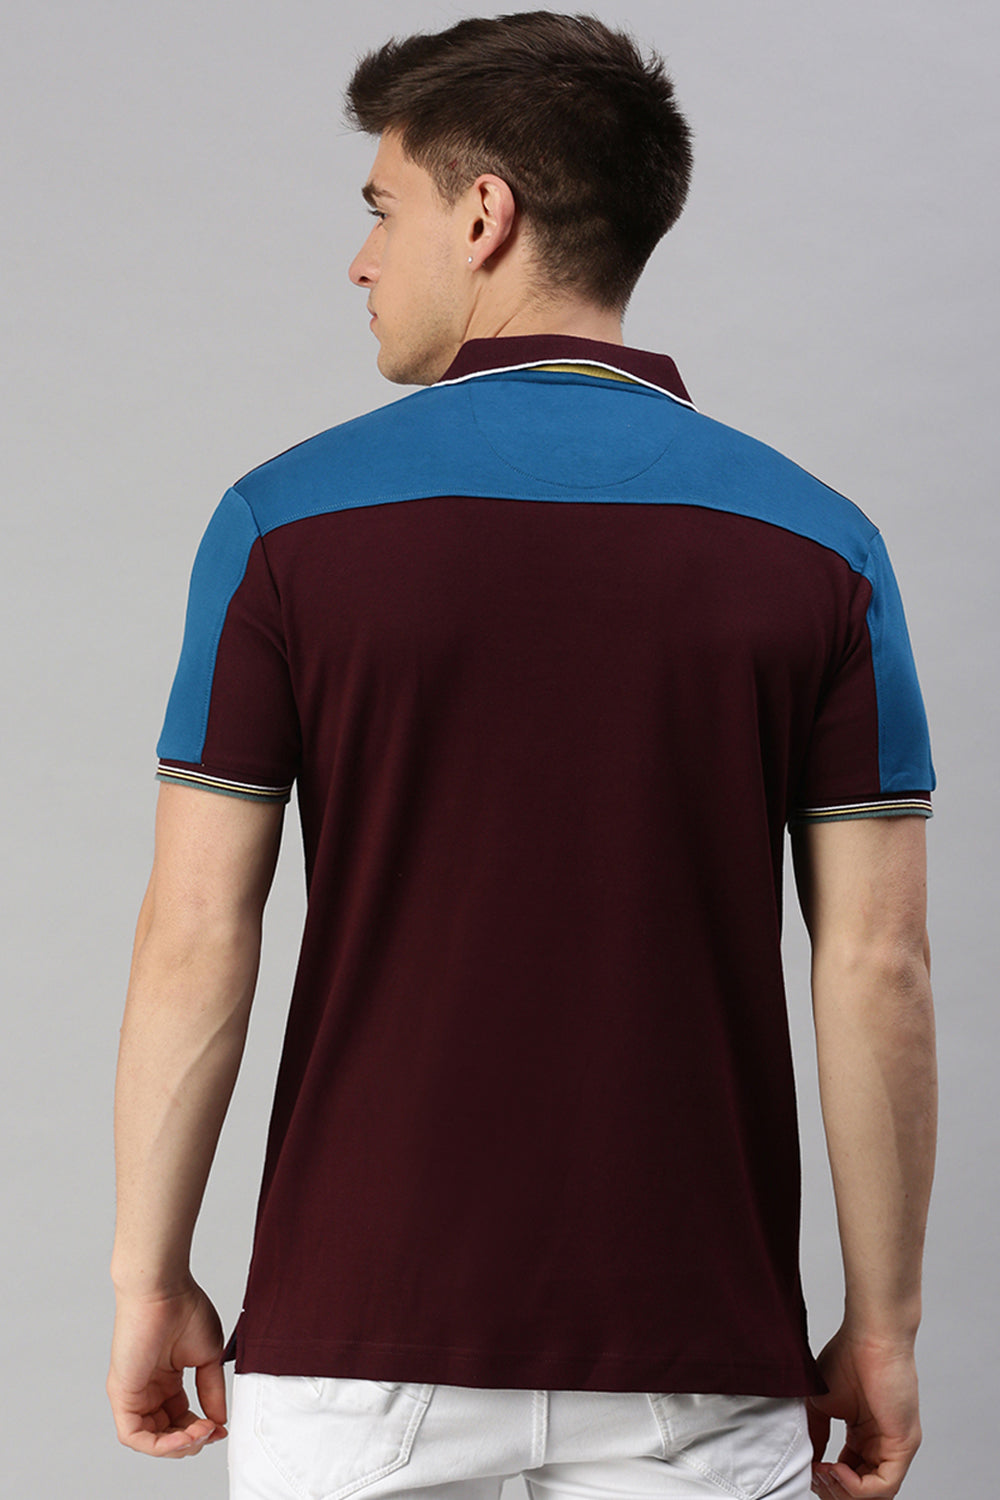 Classic Polo Men's Cotton Half Sleeve Printed Slim Fit Polo Neck Maroon Color T-Shirt | Prm - 761 B